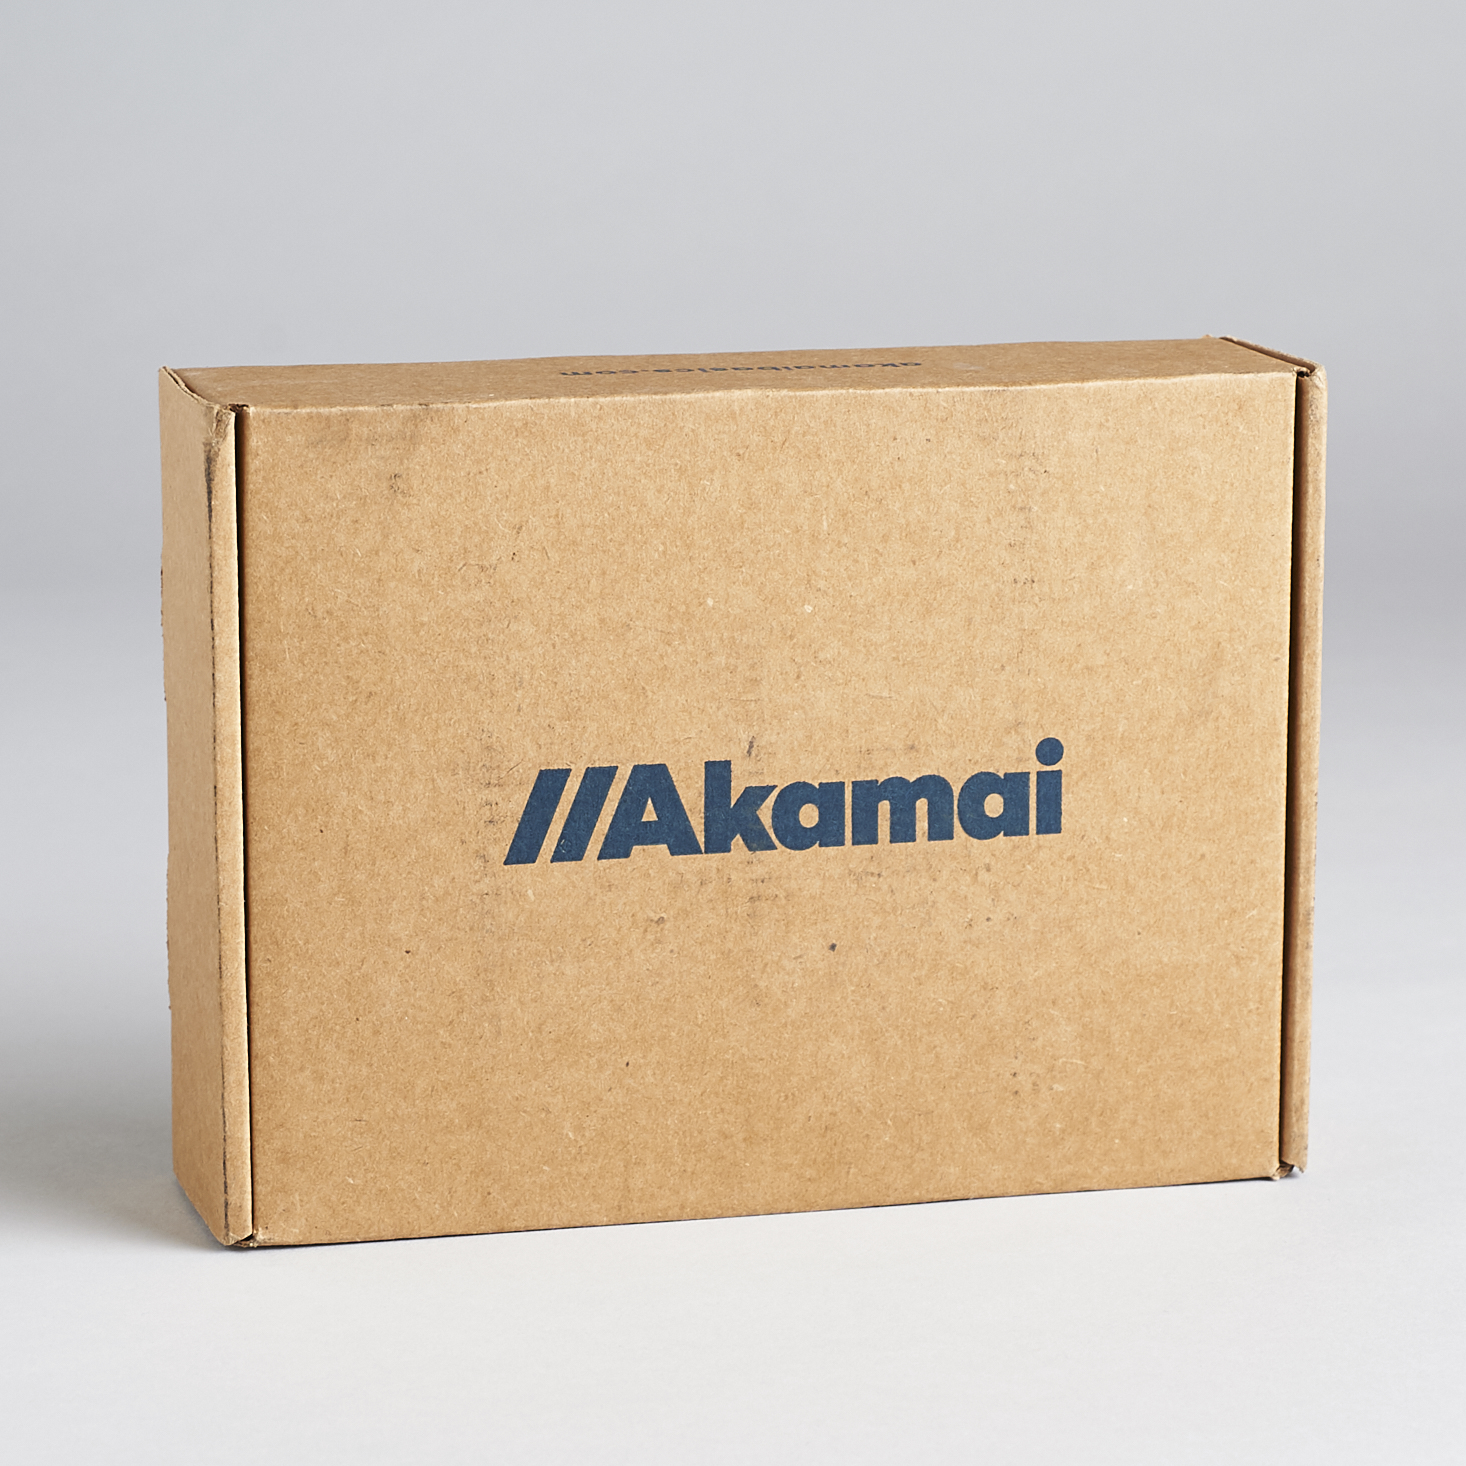 Akamai Eco-Friendly Personal Care Box Review + Coupon – May 2017